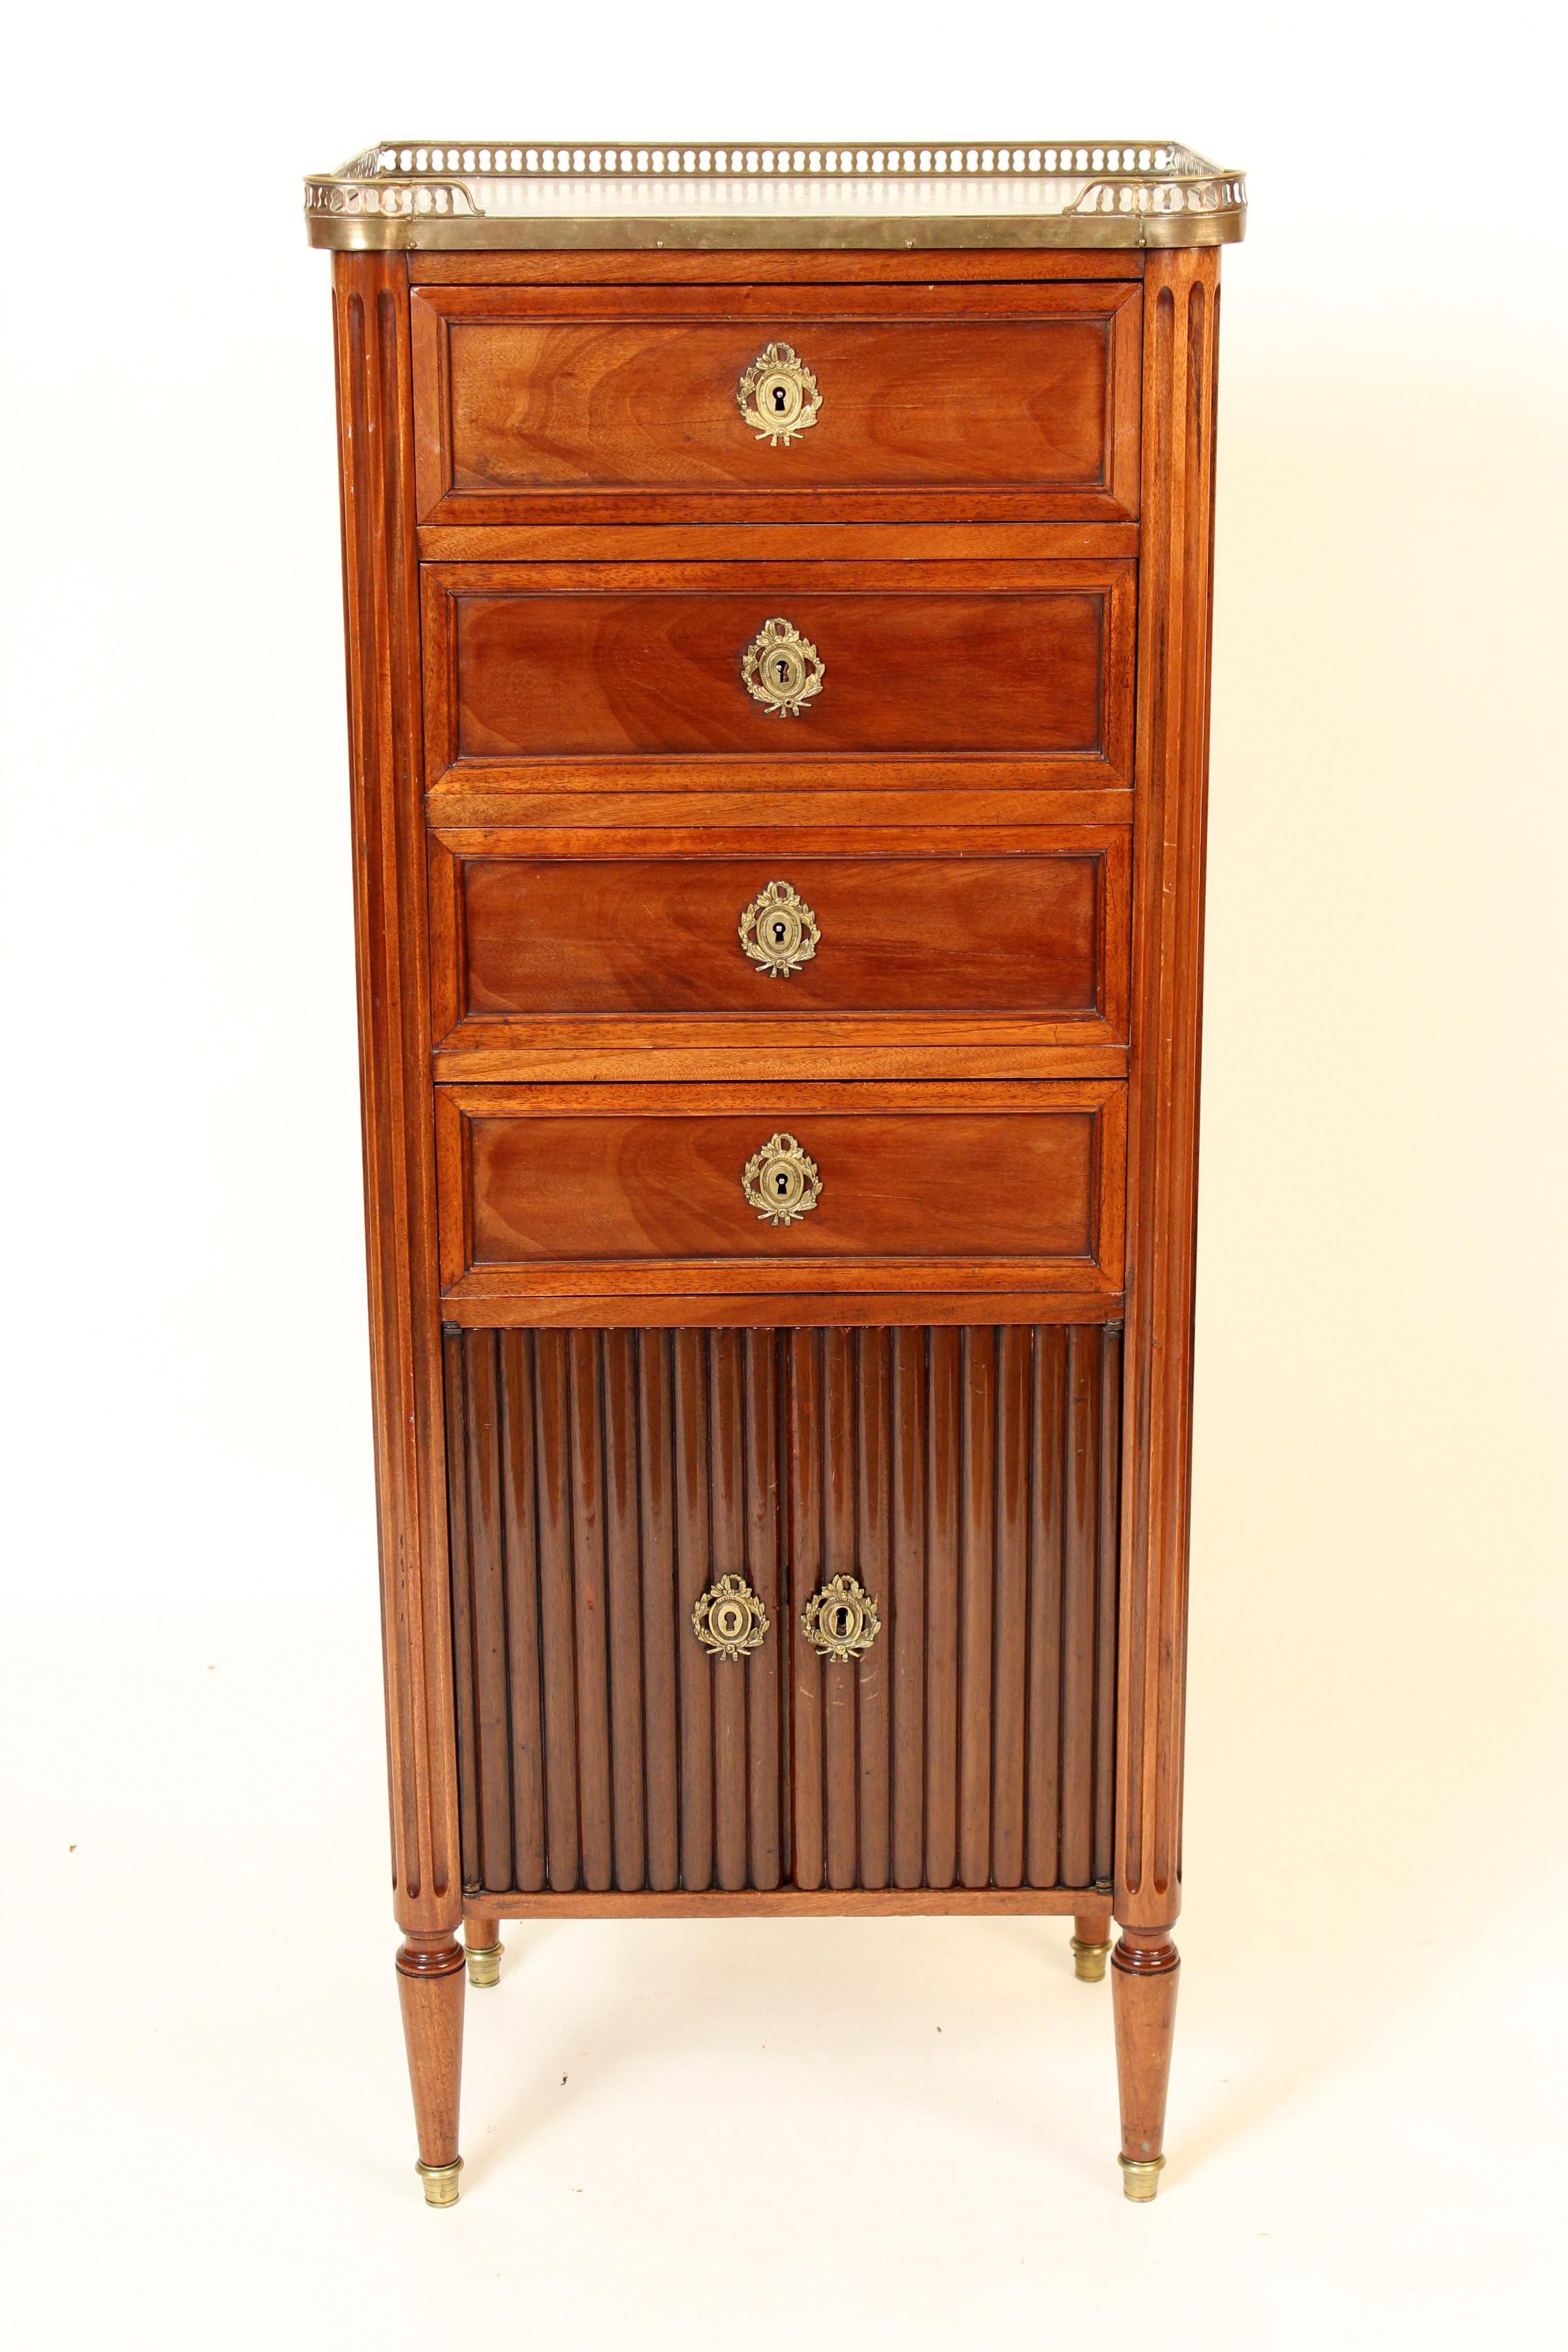 Louis XVI style mahogany lingerie chest with brass escutcheons, brass gallery, marble top and doors on the bottom, circa 1920. Nice quality mahogany used on this chest.